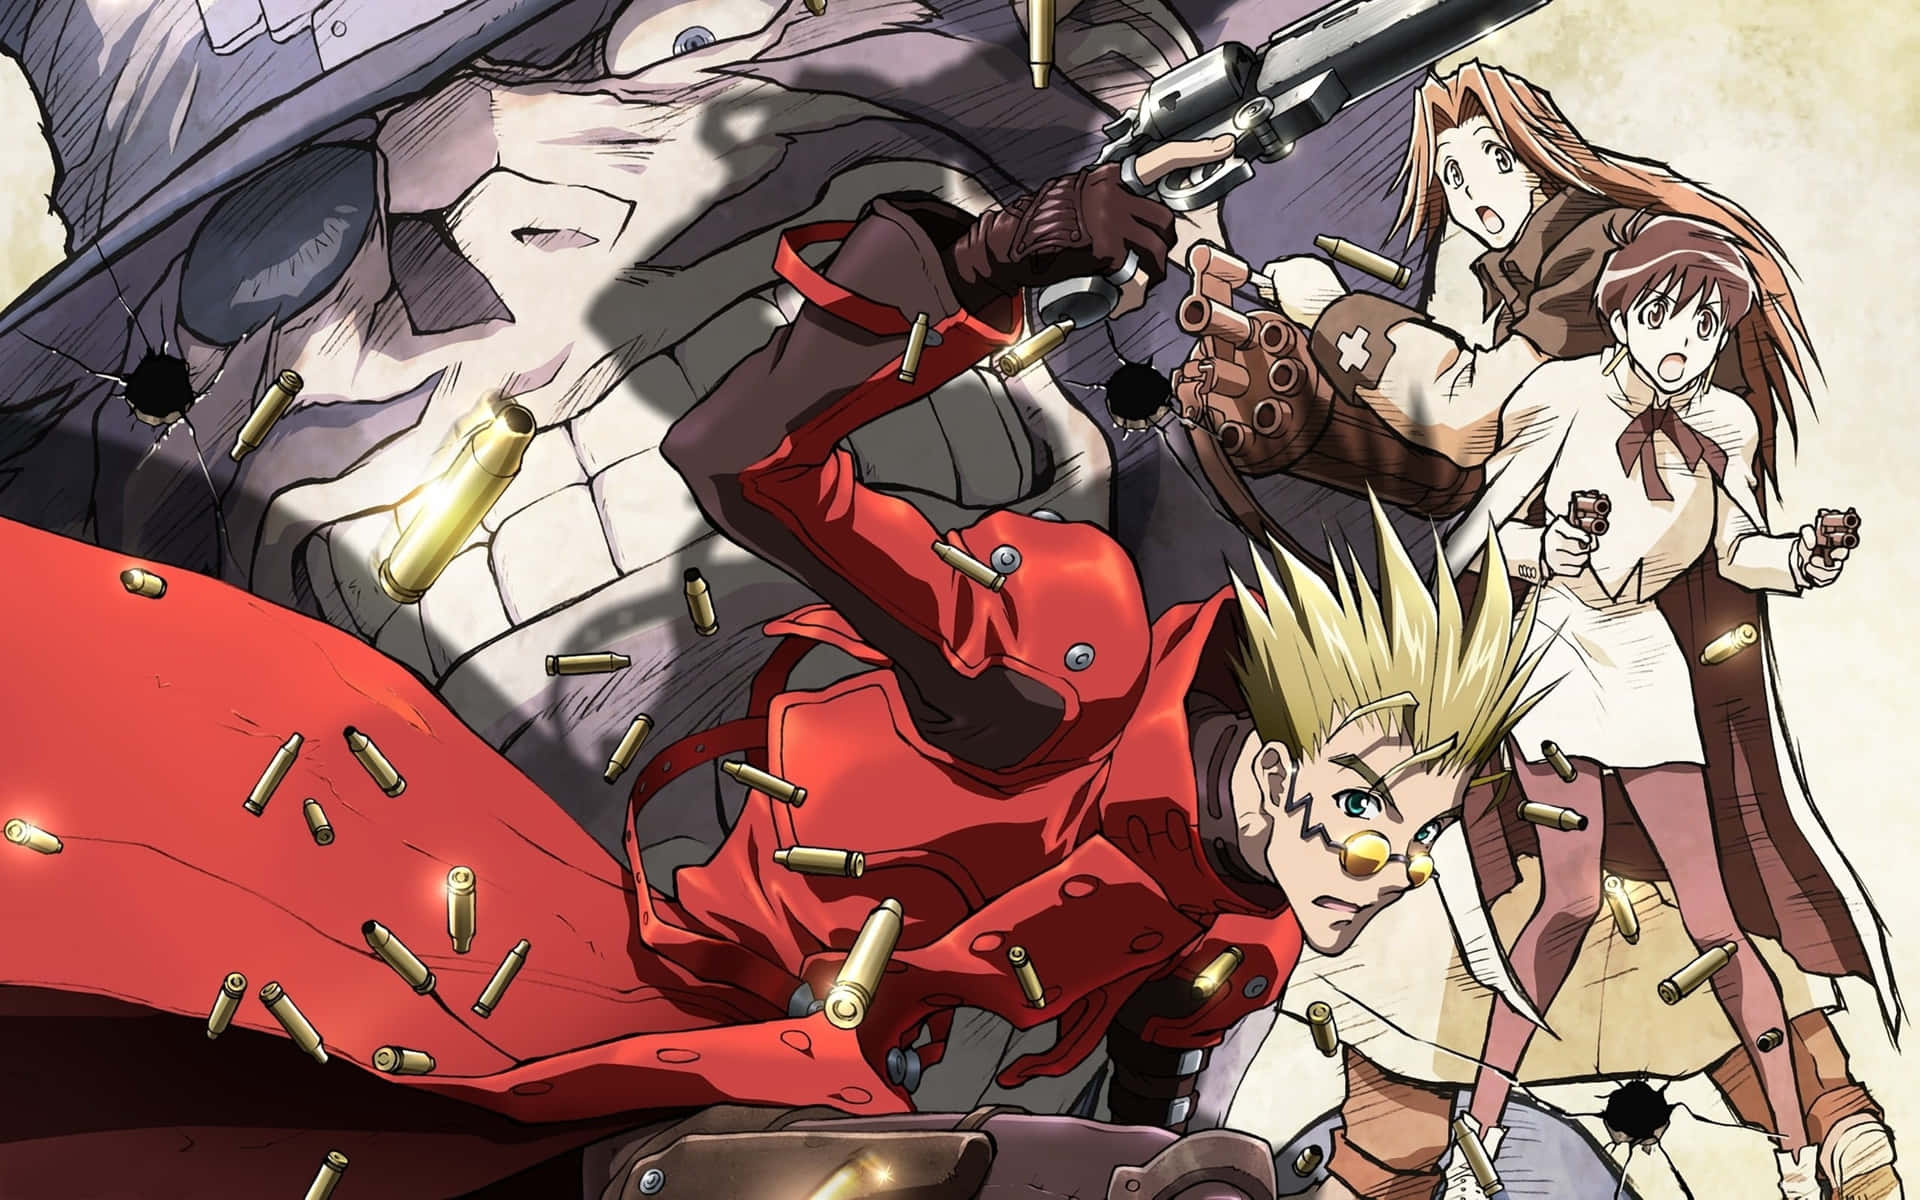 Vash The Stampede from Trigun – Armed and Ready for Action